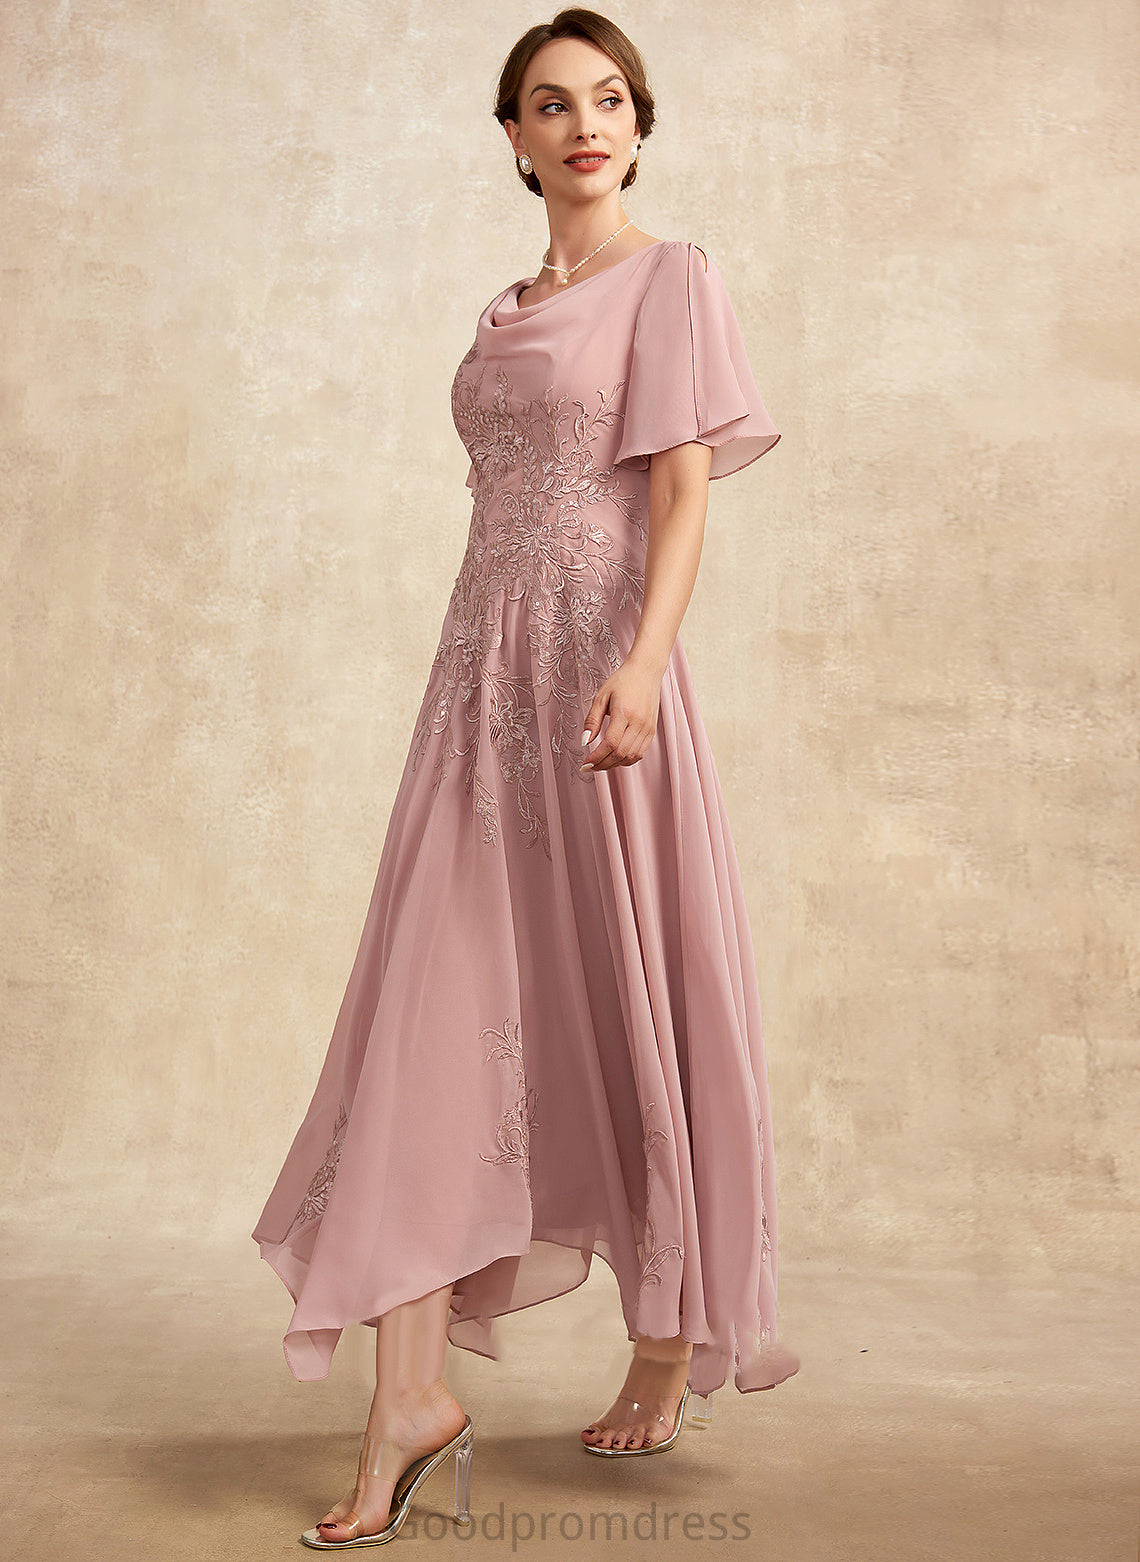 A-Line Ankle-Length the Mother of the Bride Dresses Dress Mother Chiffon of Cowl Fiona Bride Neck Lace